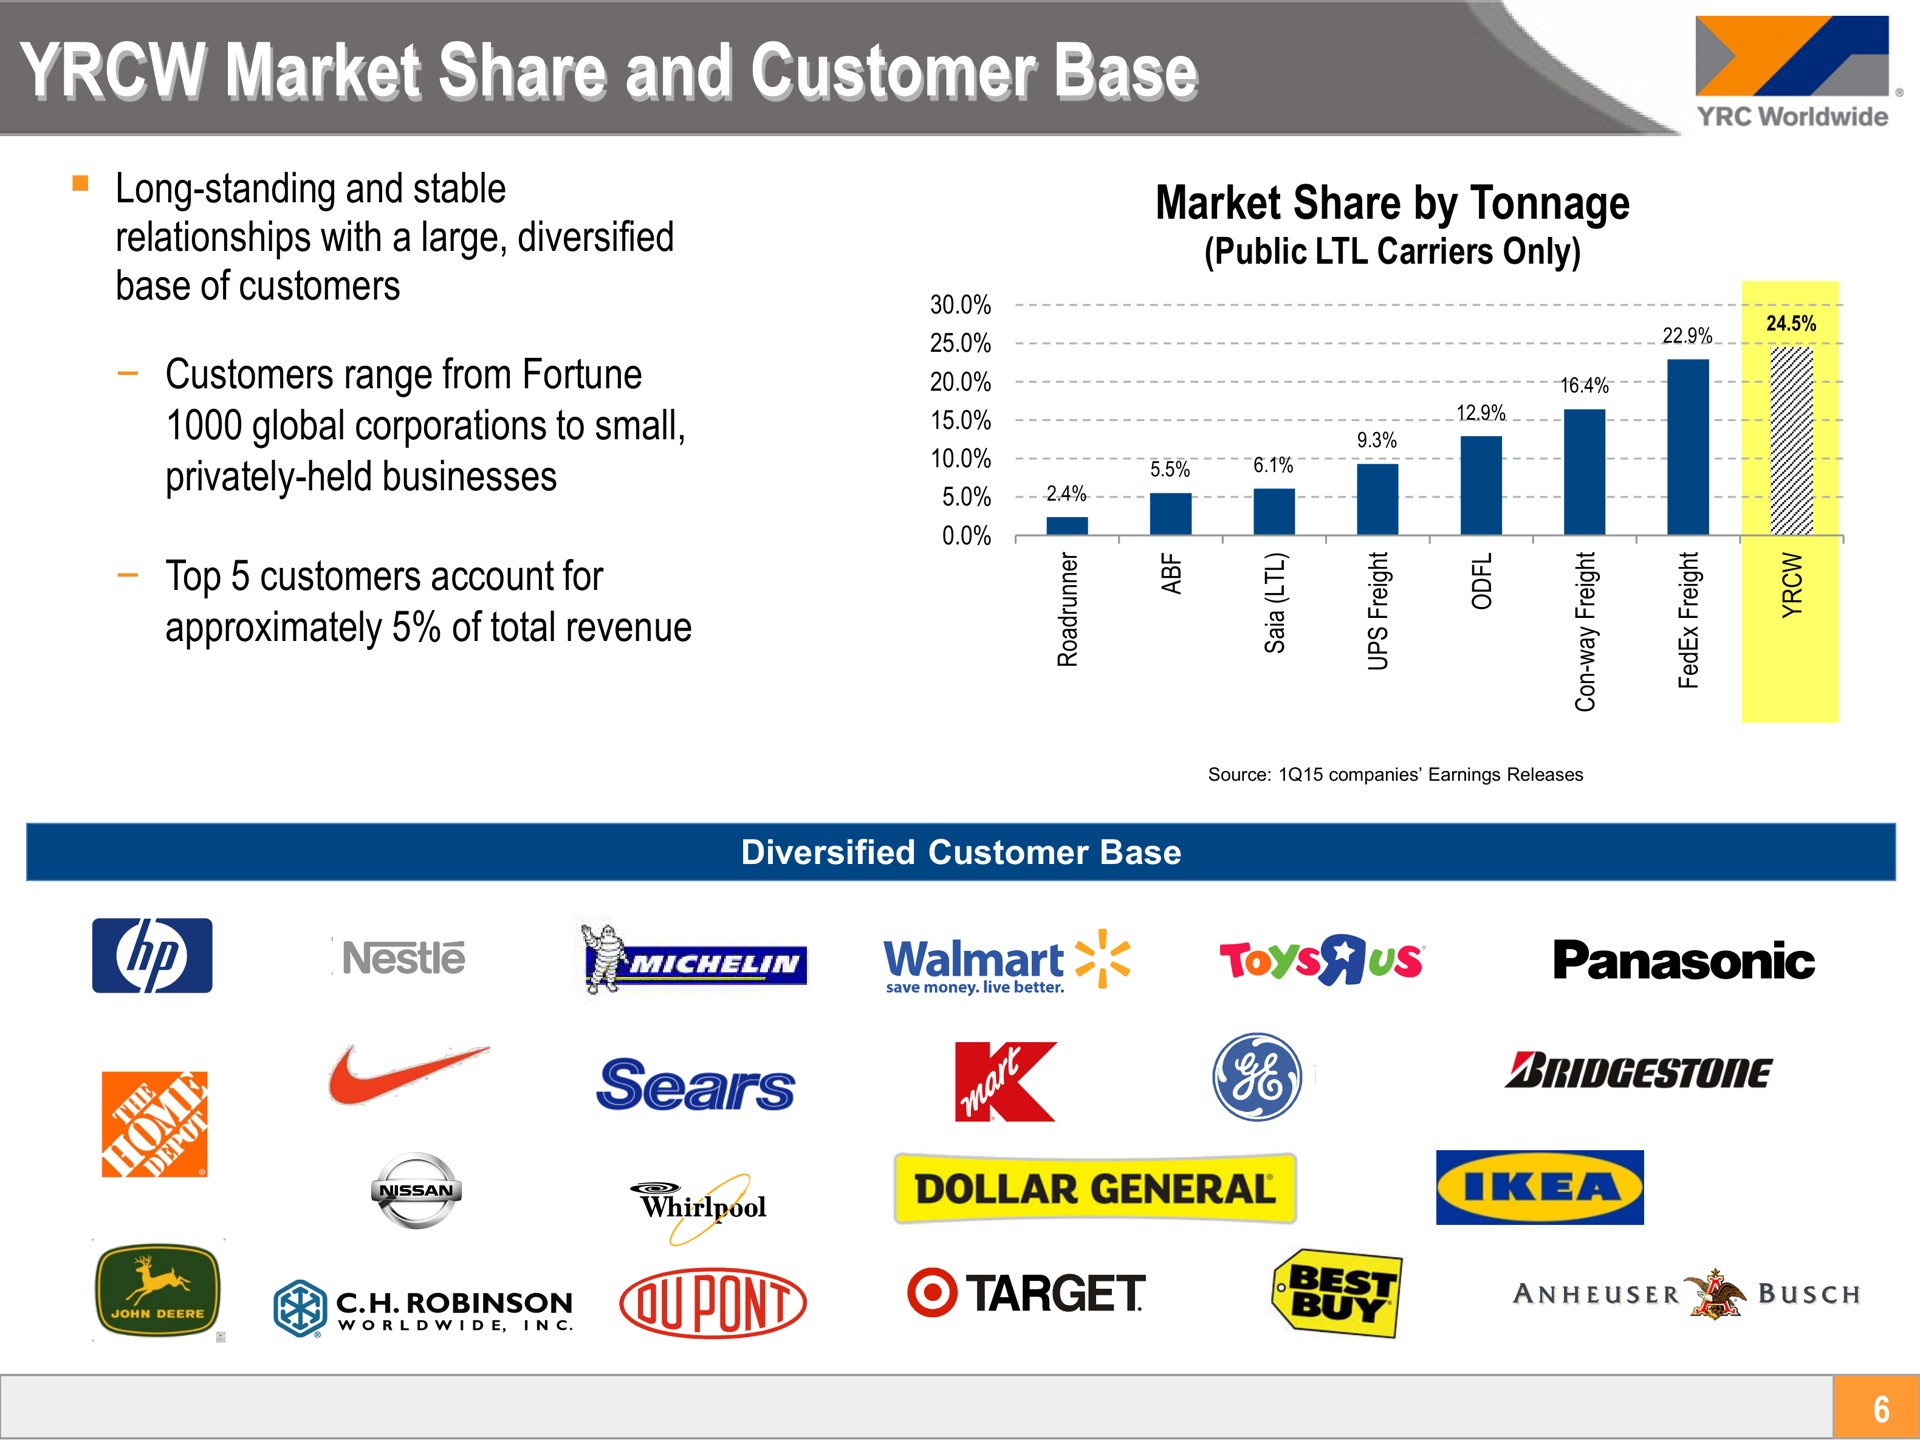 market share and customer base market share by tonnage long standing stable relationships with a large diversified privately held businesses approximately of total revenue public carriers only i as sears we dollar general target buy | Yellow Corporation